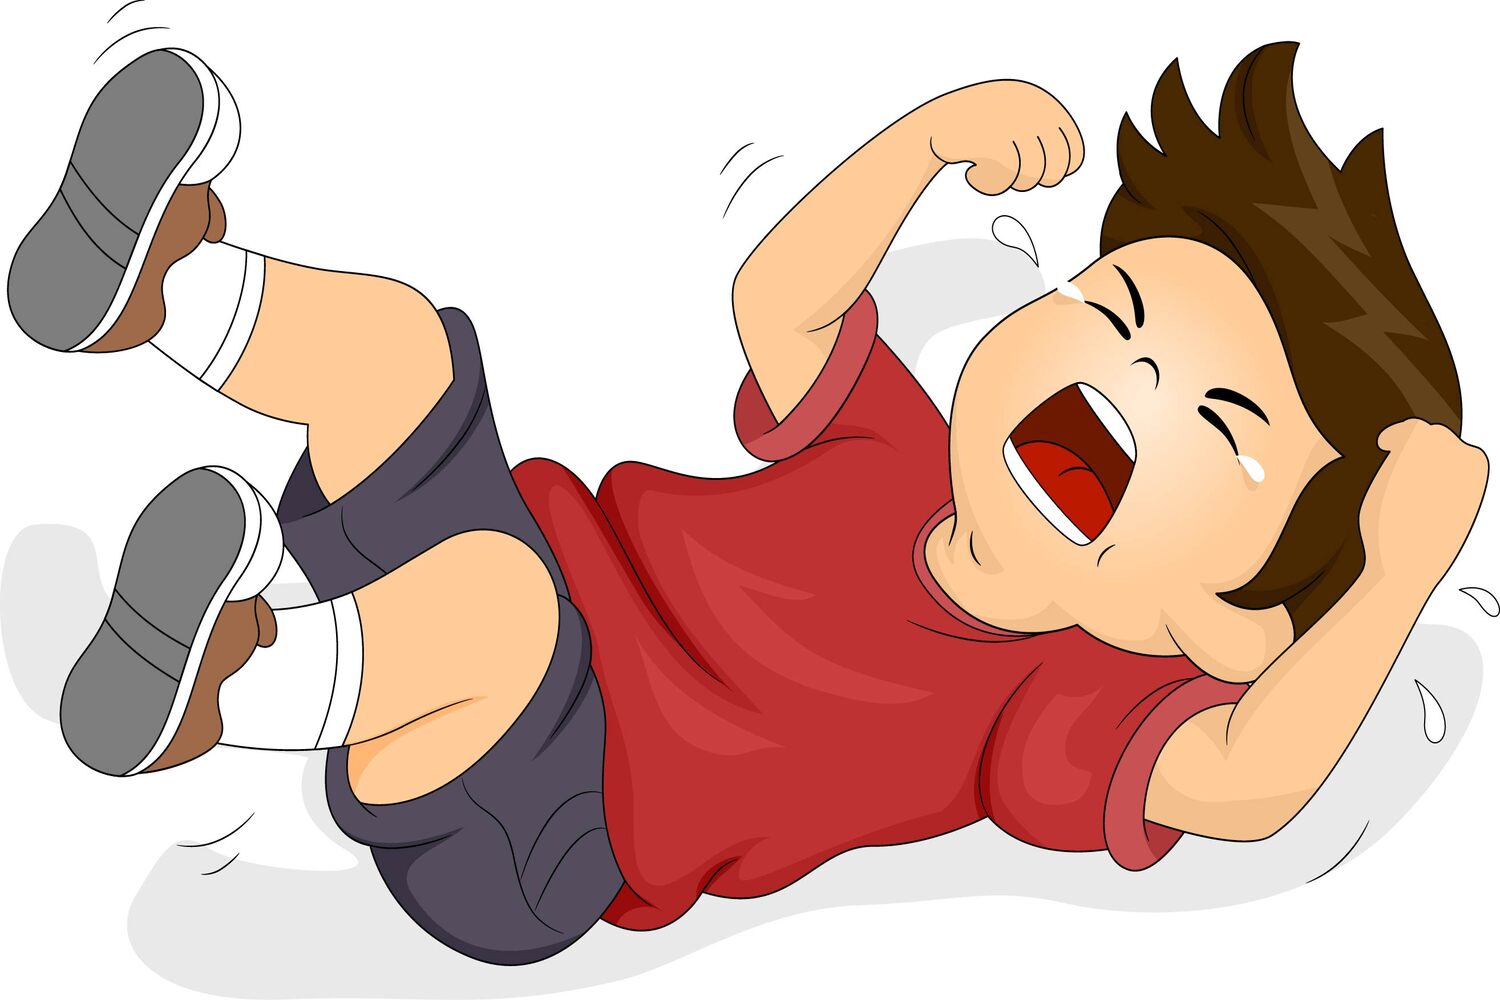 Tantrum can occur due to various reasons